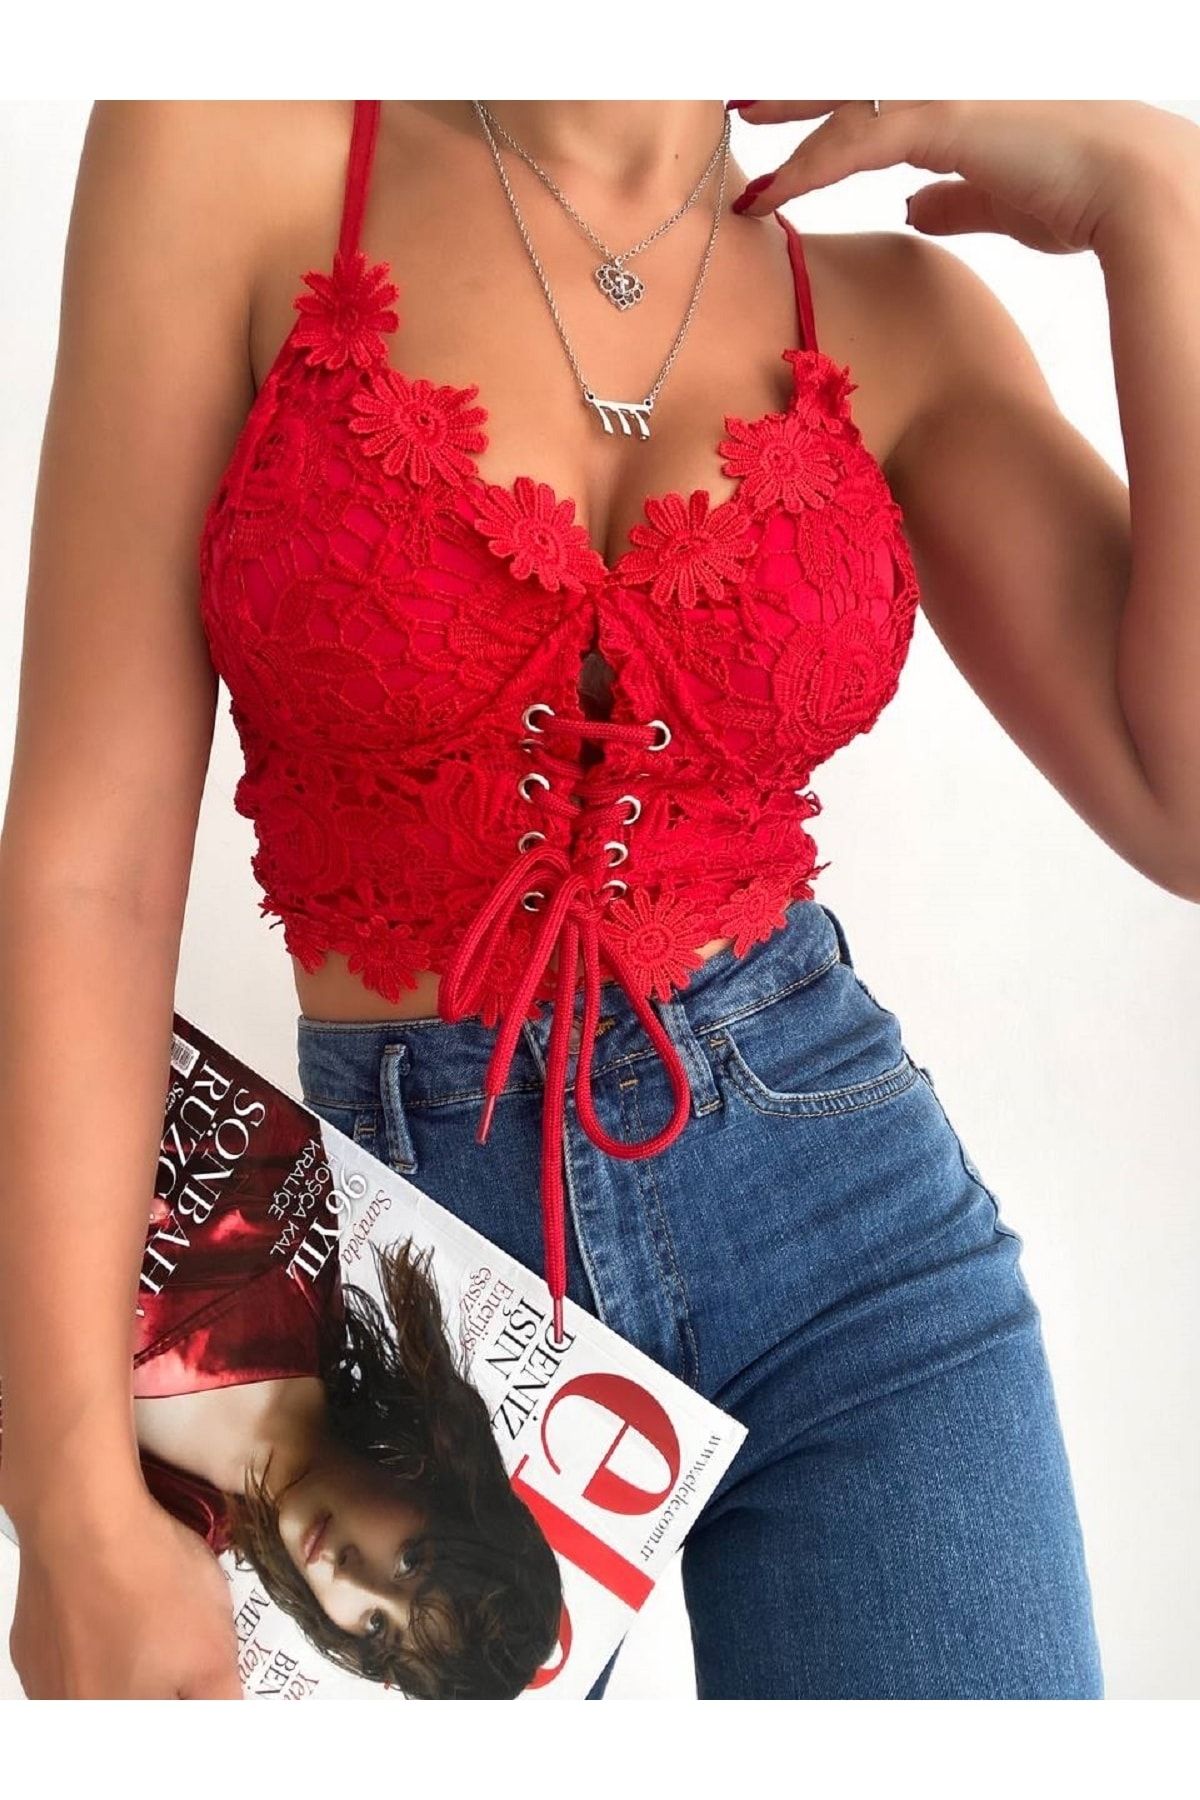 Dark Lavish Women's Red Stylish Crop Bustier with Rope Detail on the Front,  Zipper on the Back, Straps and Lace - Trendyol